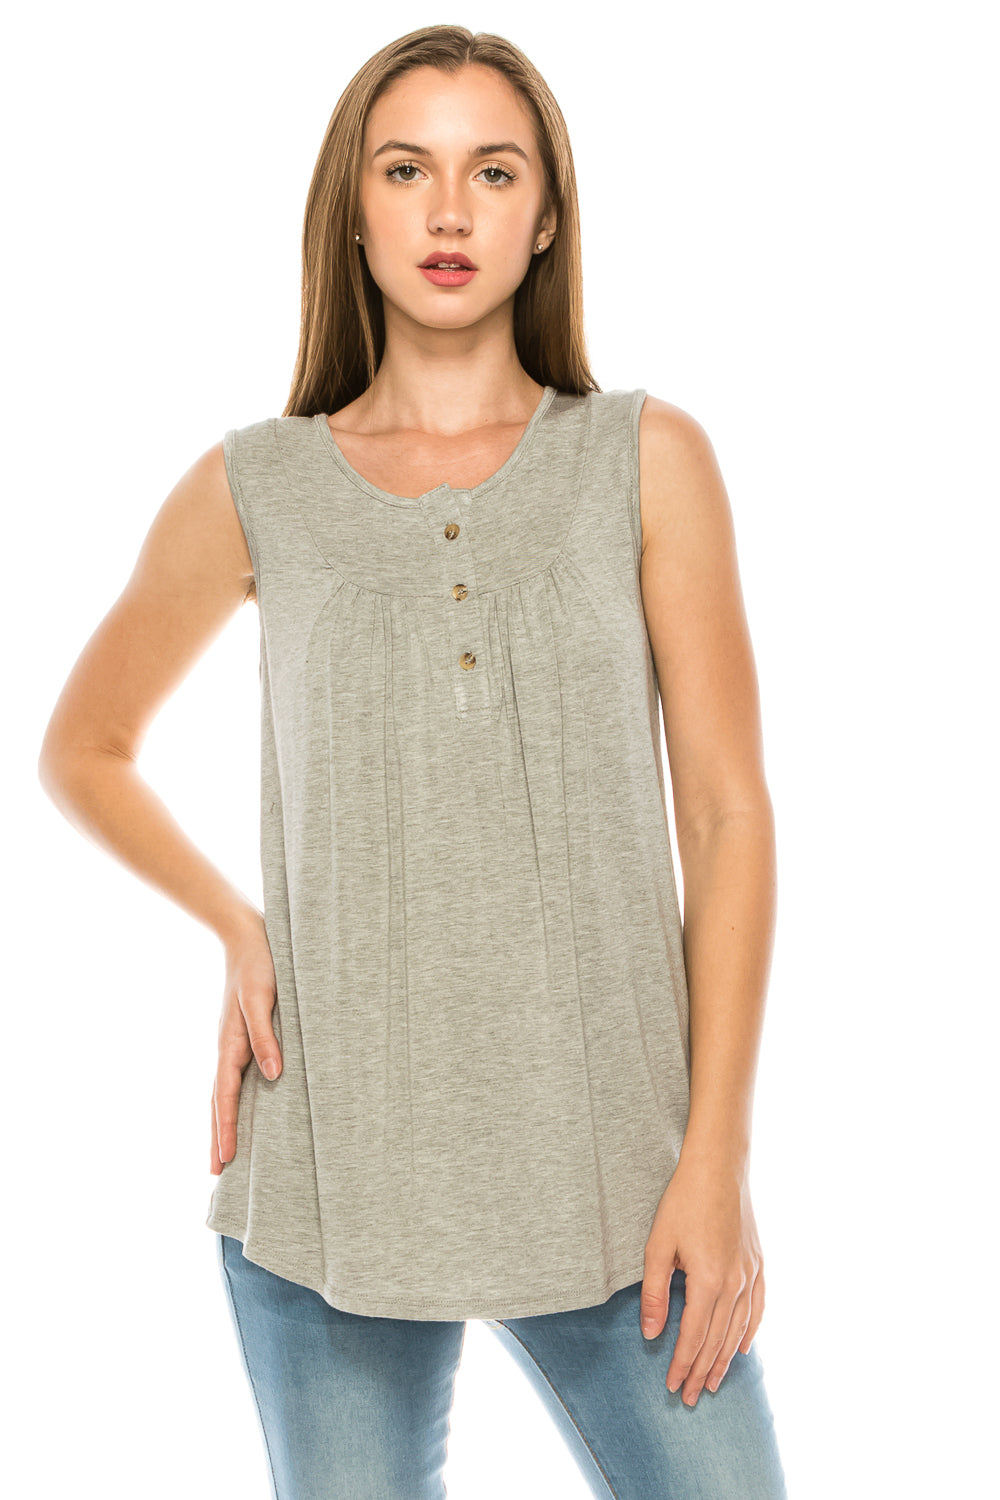 Made in USA Sleeveless Tops Round Neck Soft T-Shirts Tunic Button up Casual Blouses - annva-usa